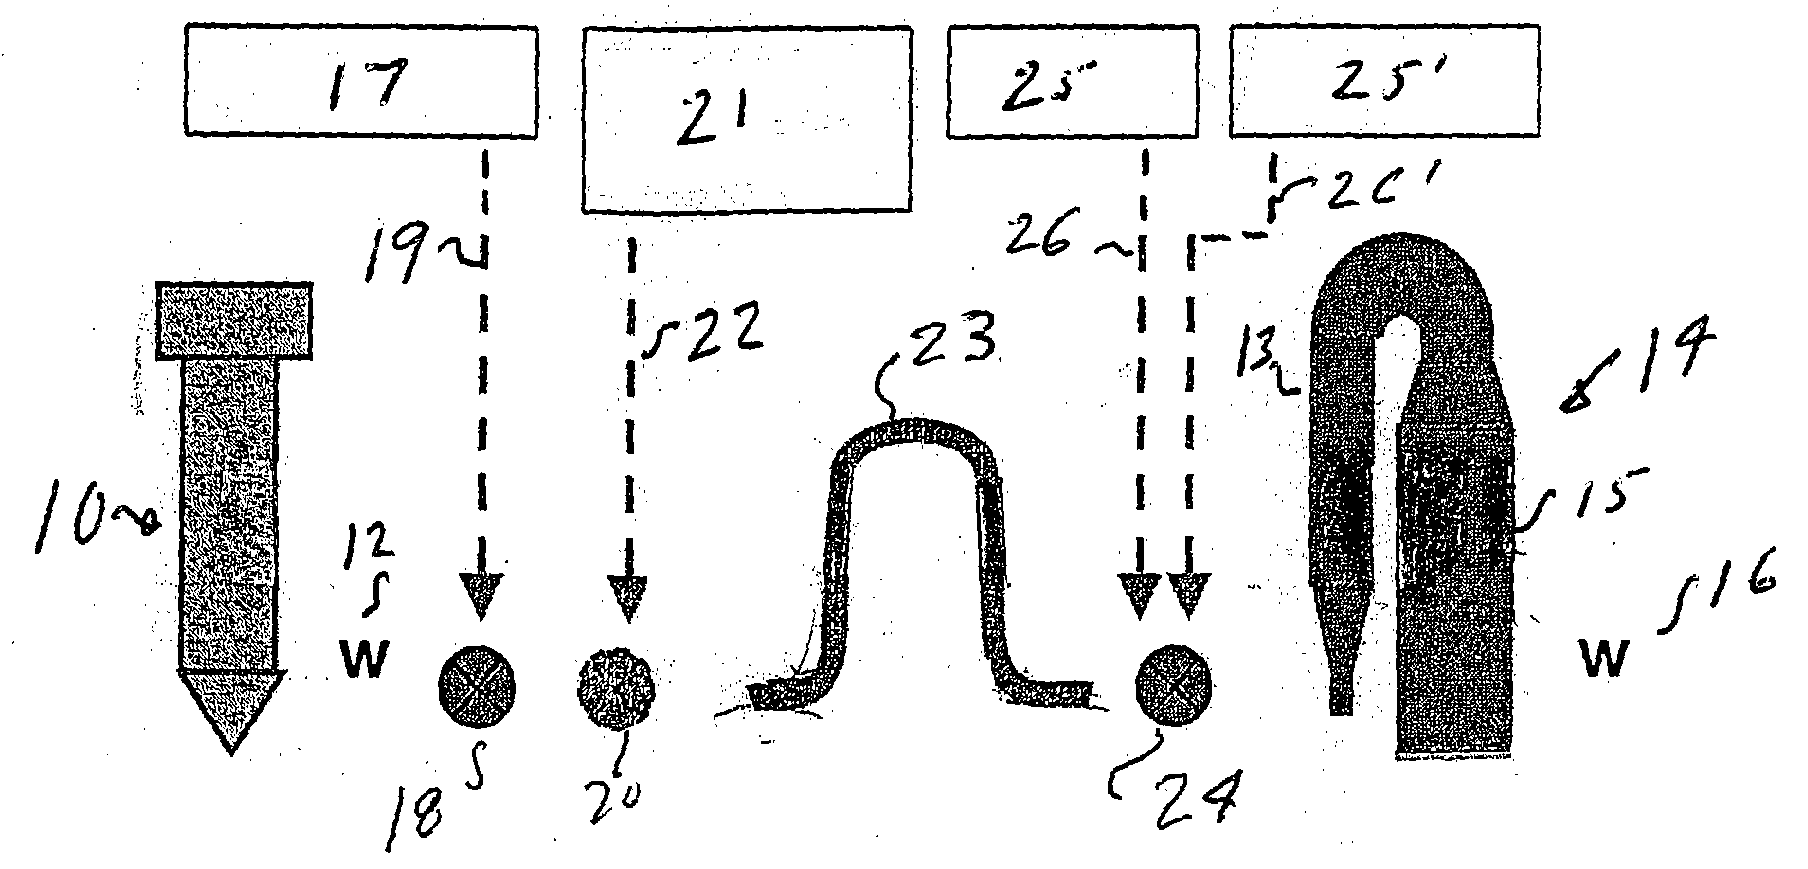 Apparatus for making carboxylated pulp fibers